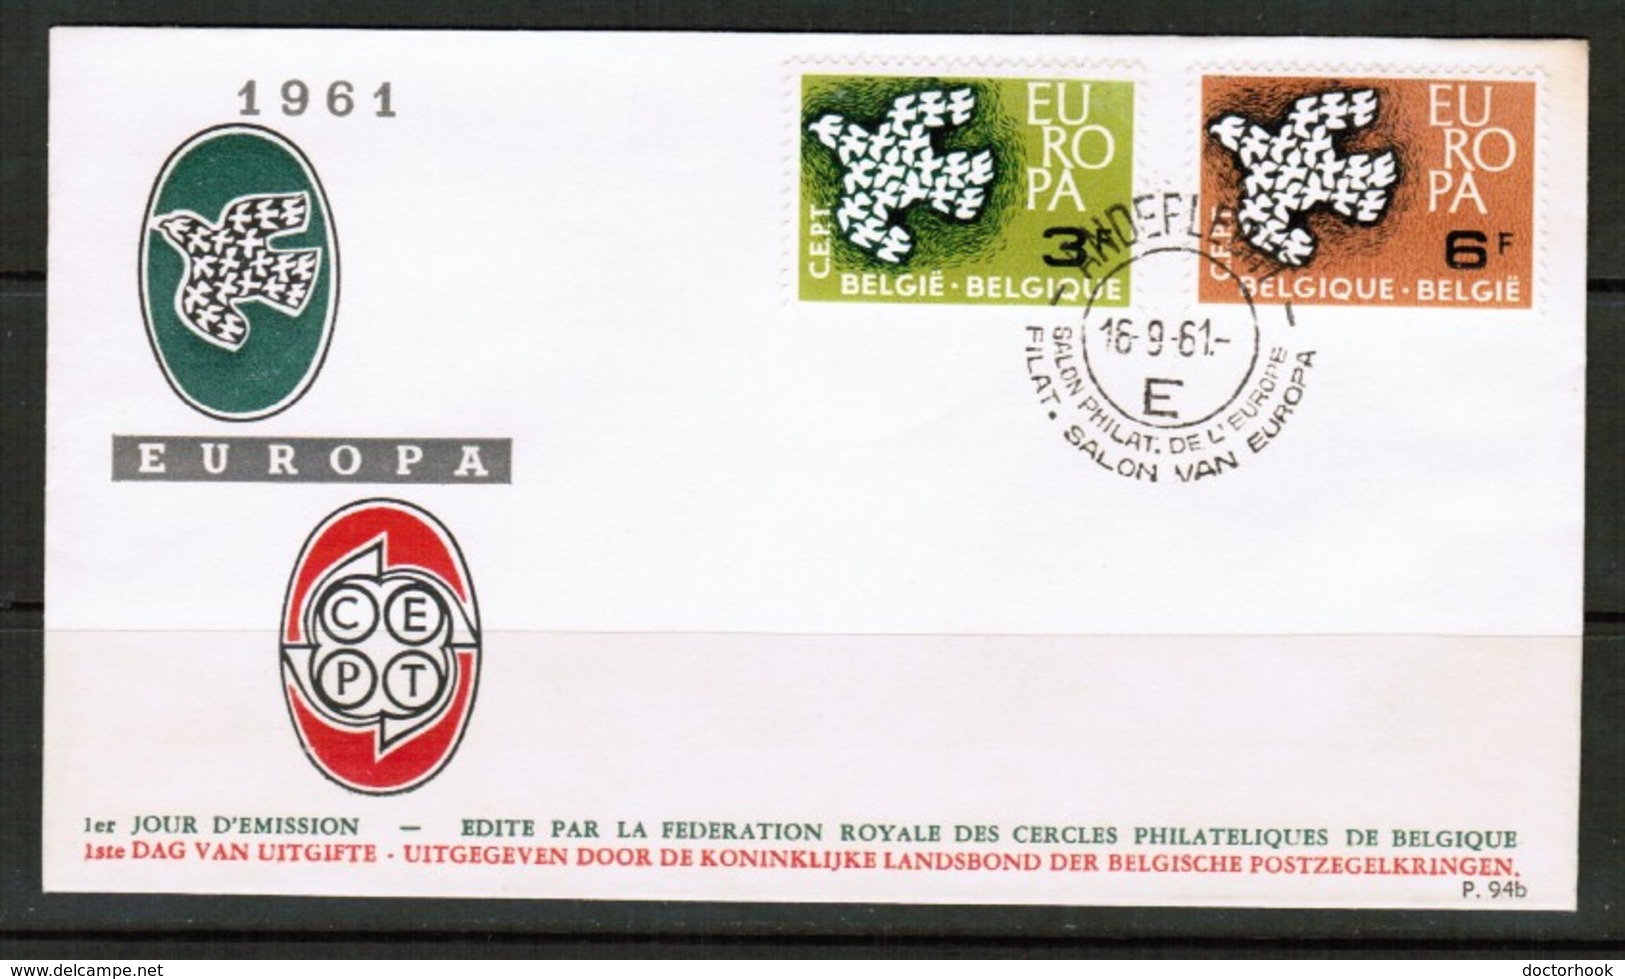 BELGIUM   Scott # 572-3 On 1961 "EUROPA" FIRST DAY COVER (F.D.C.) (OS-519) - 1961